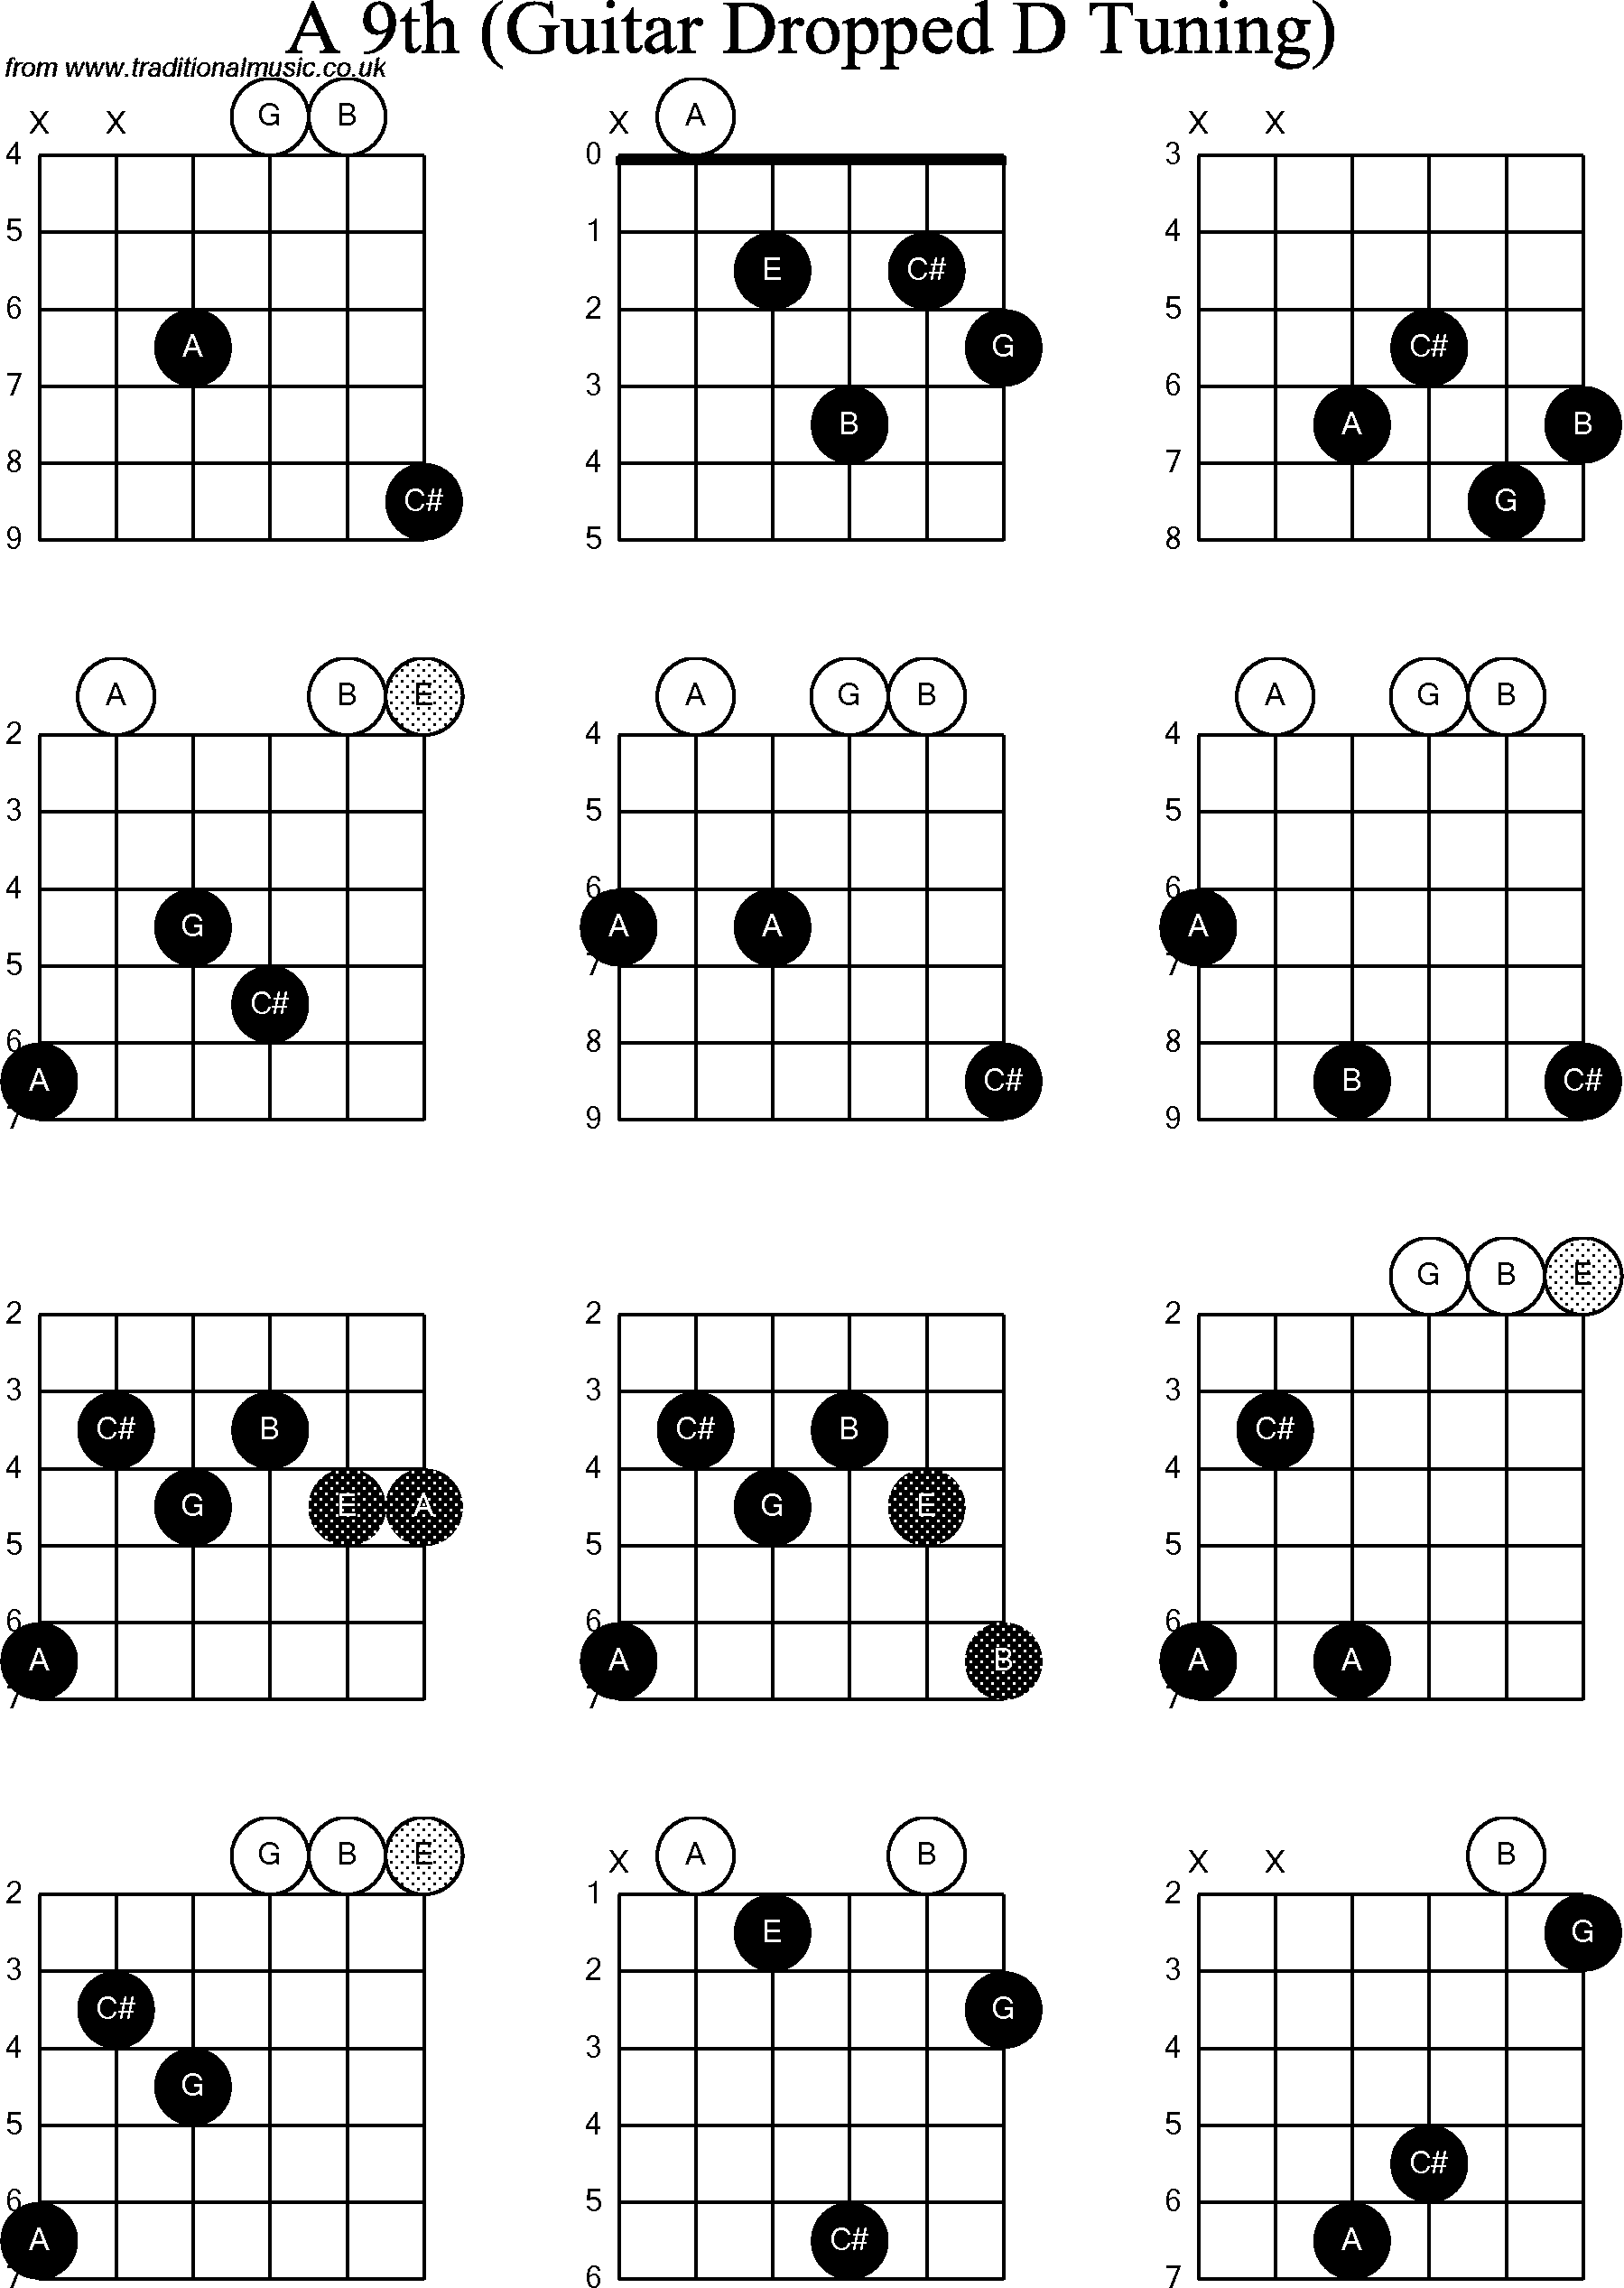 Chord diagrams for dropped D Guitar(DADGBE), A9th